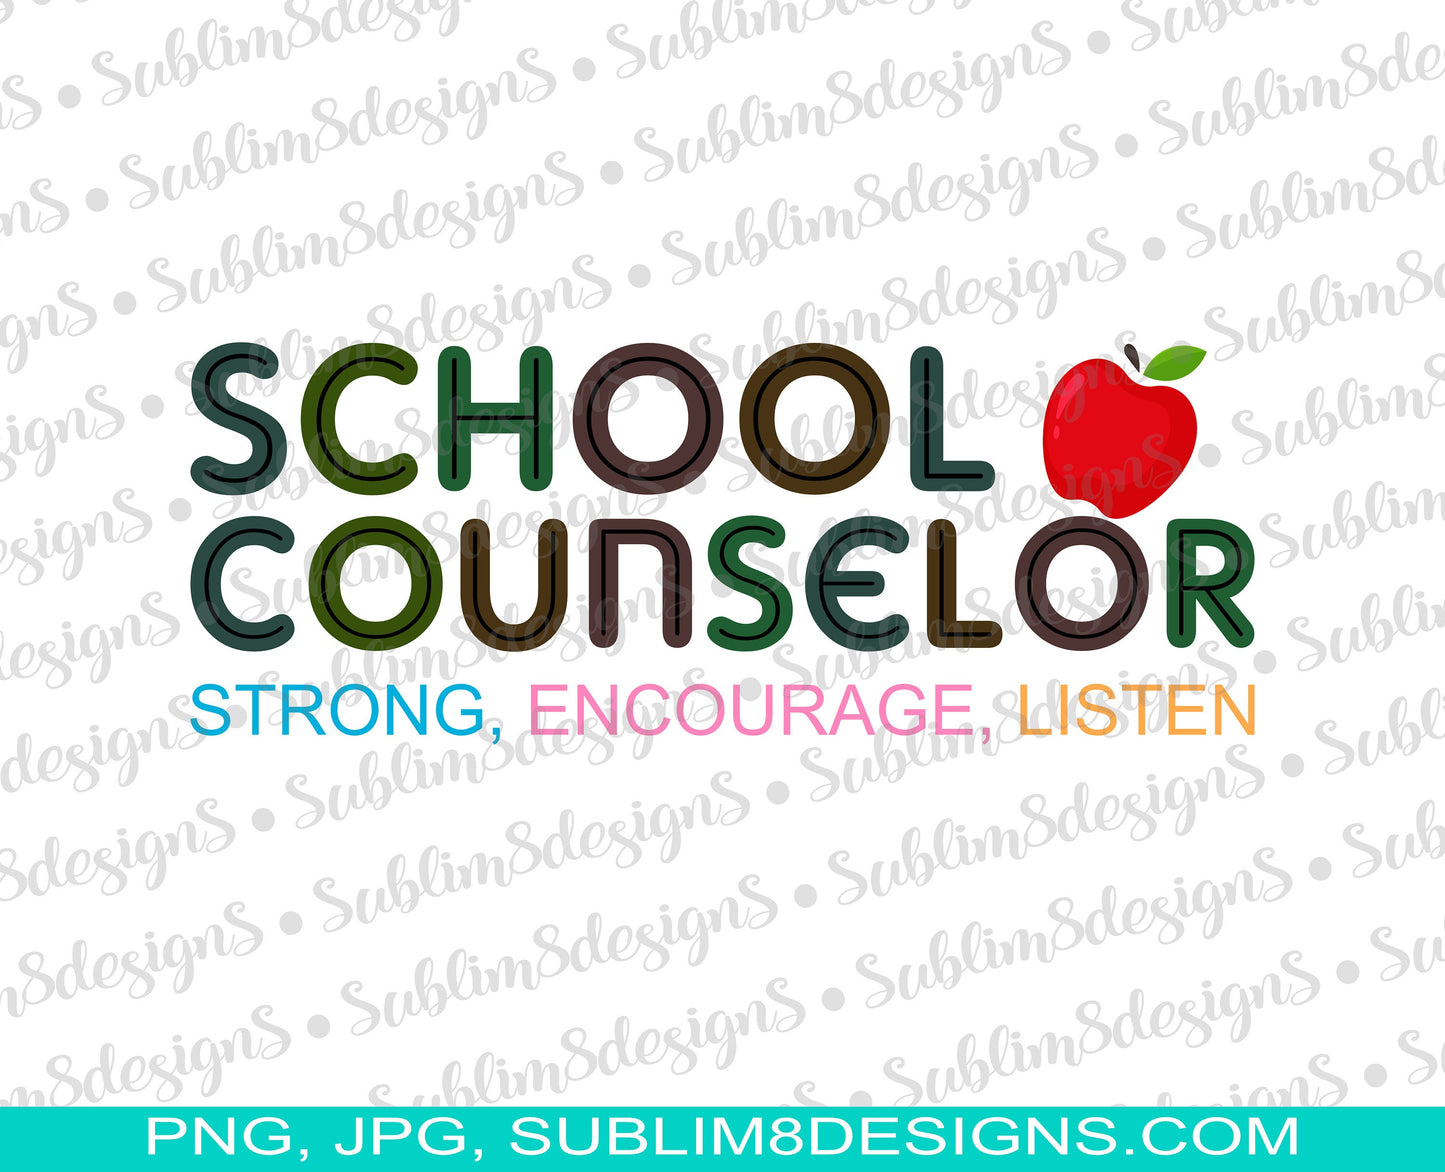 School Counselor Strong, Encourage, Listen PNG and JPG ONLY